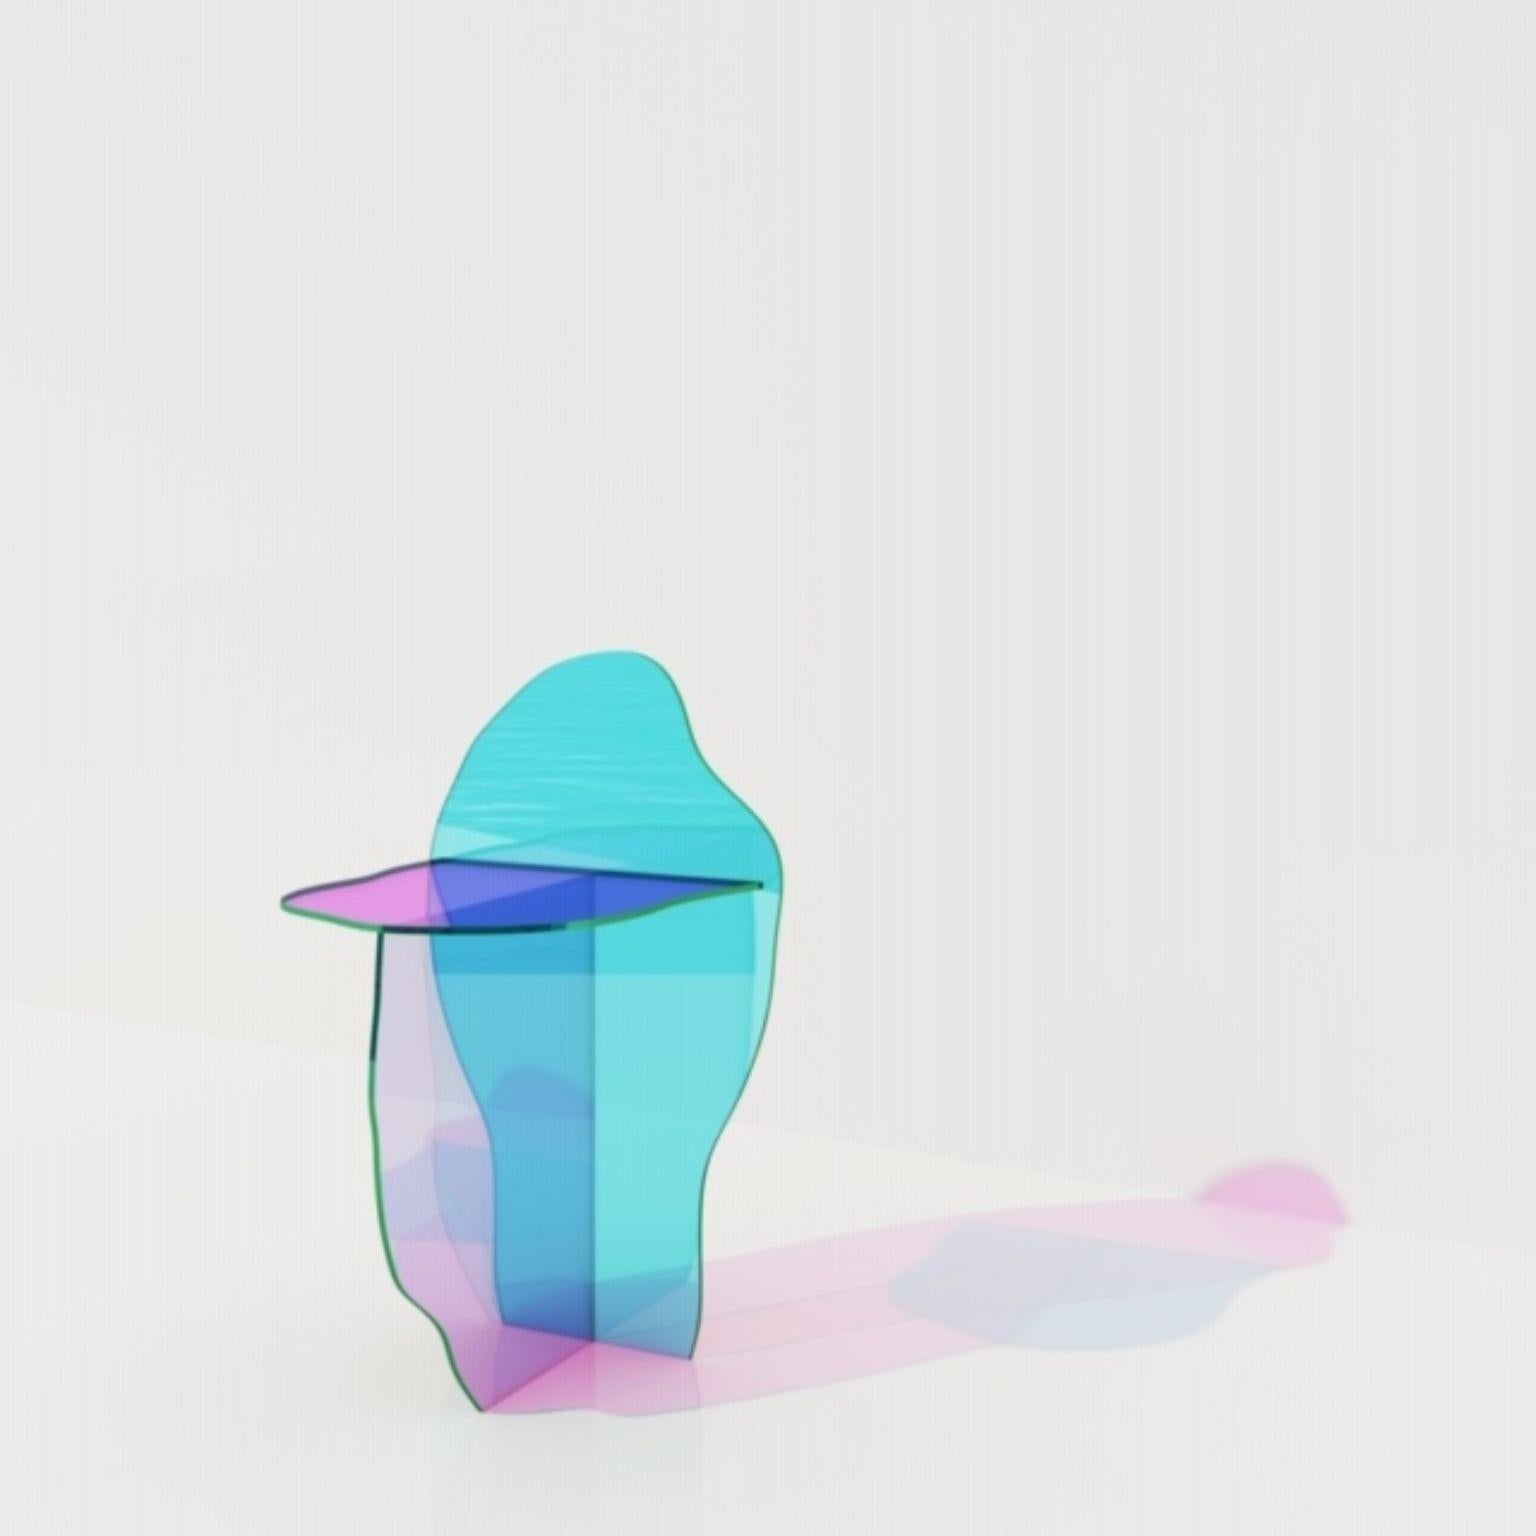 Isola chair by Brajak Vitberg
Dimensions: 43 x 55 x 85 cm
Materials: Dichroic glass

Can be made in Satin glass finish. Please contact us.

Bijelic and Brajak are two architects from Ljubljana, Slovenia.
They are striving to design Craft elements